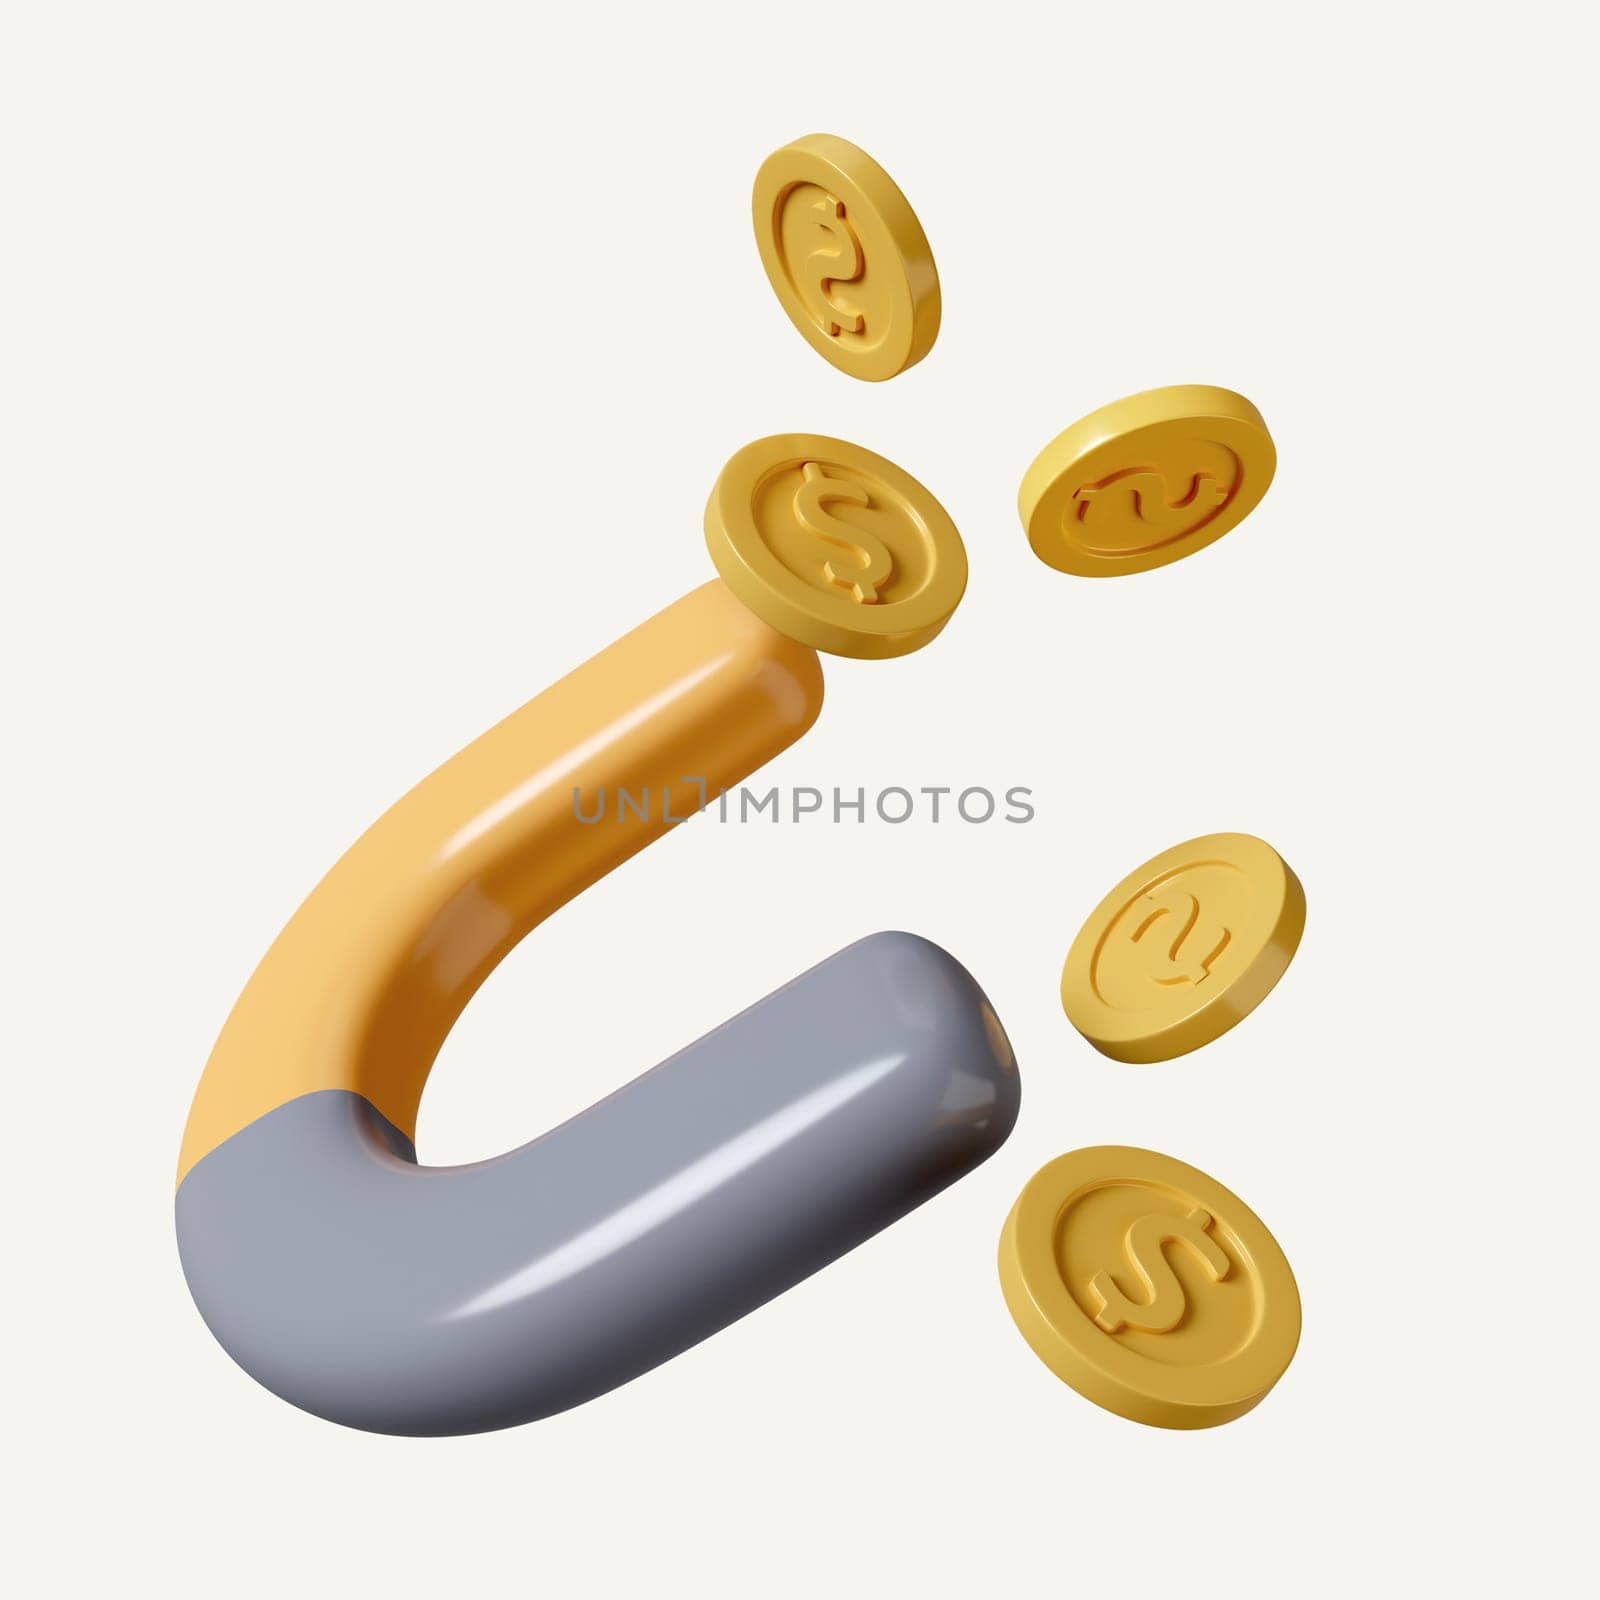 3d magnet attracts money. coins fly according to gravity. passive income. in excess of profit. icon isolated on white background. 3d rendering illustration. Clipping path..